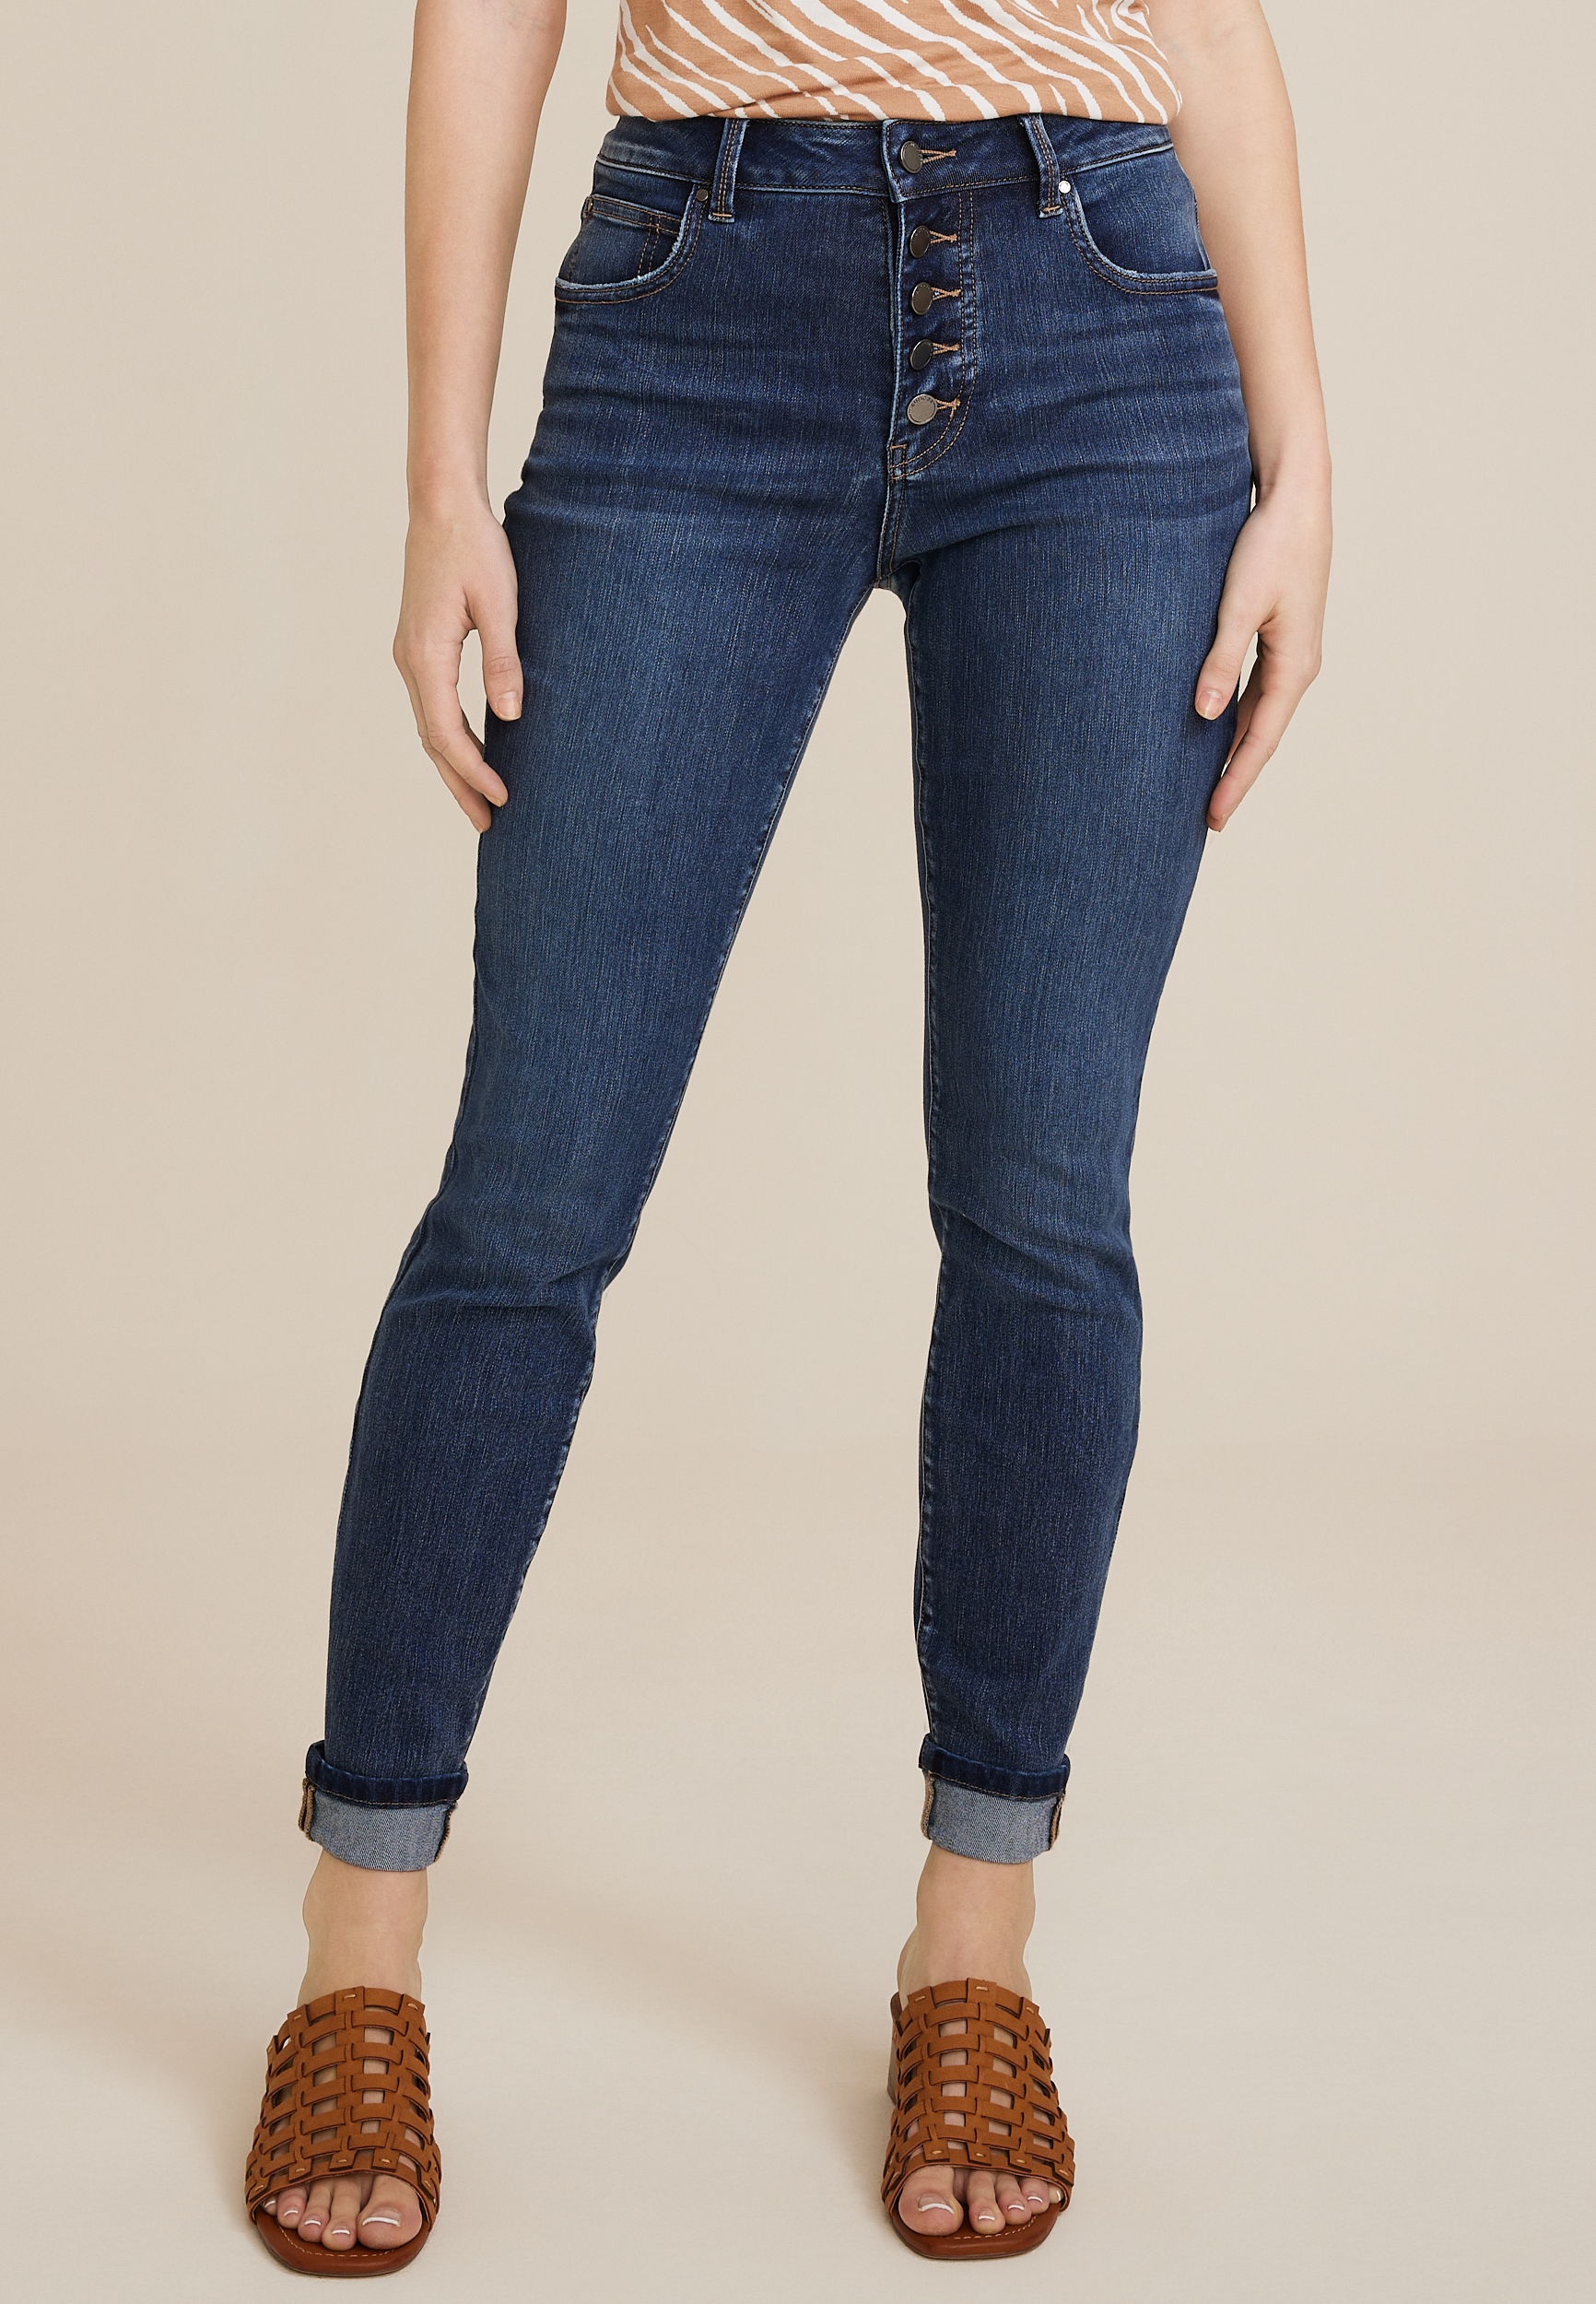 m jeans by maurices™ Vintage Mid Rise Jegging